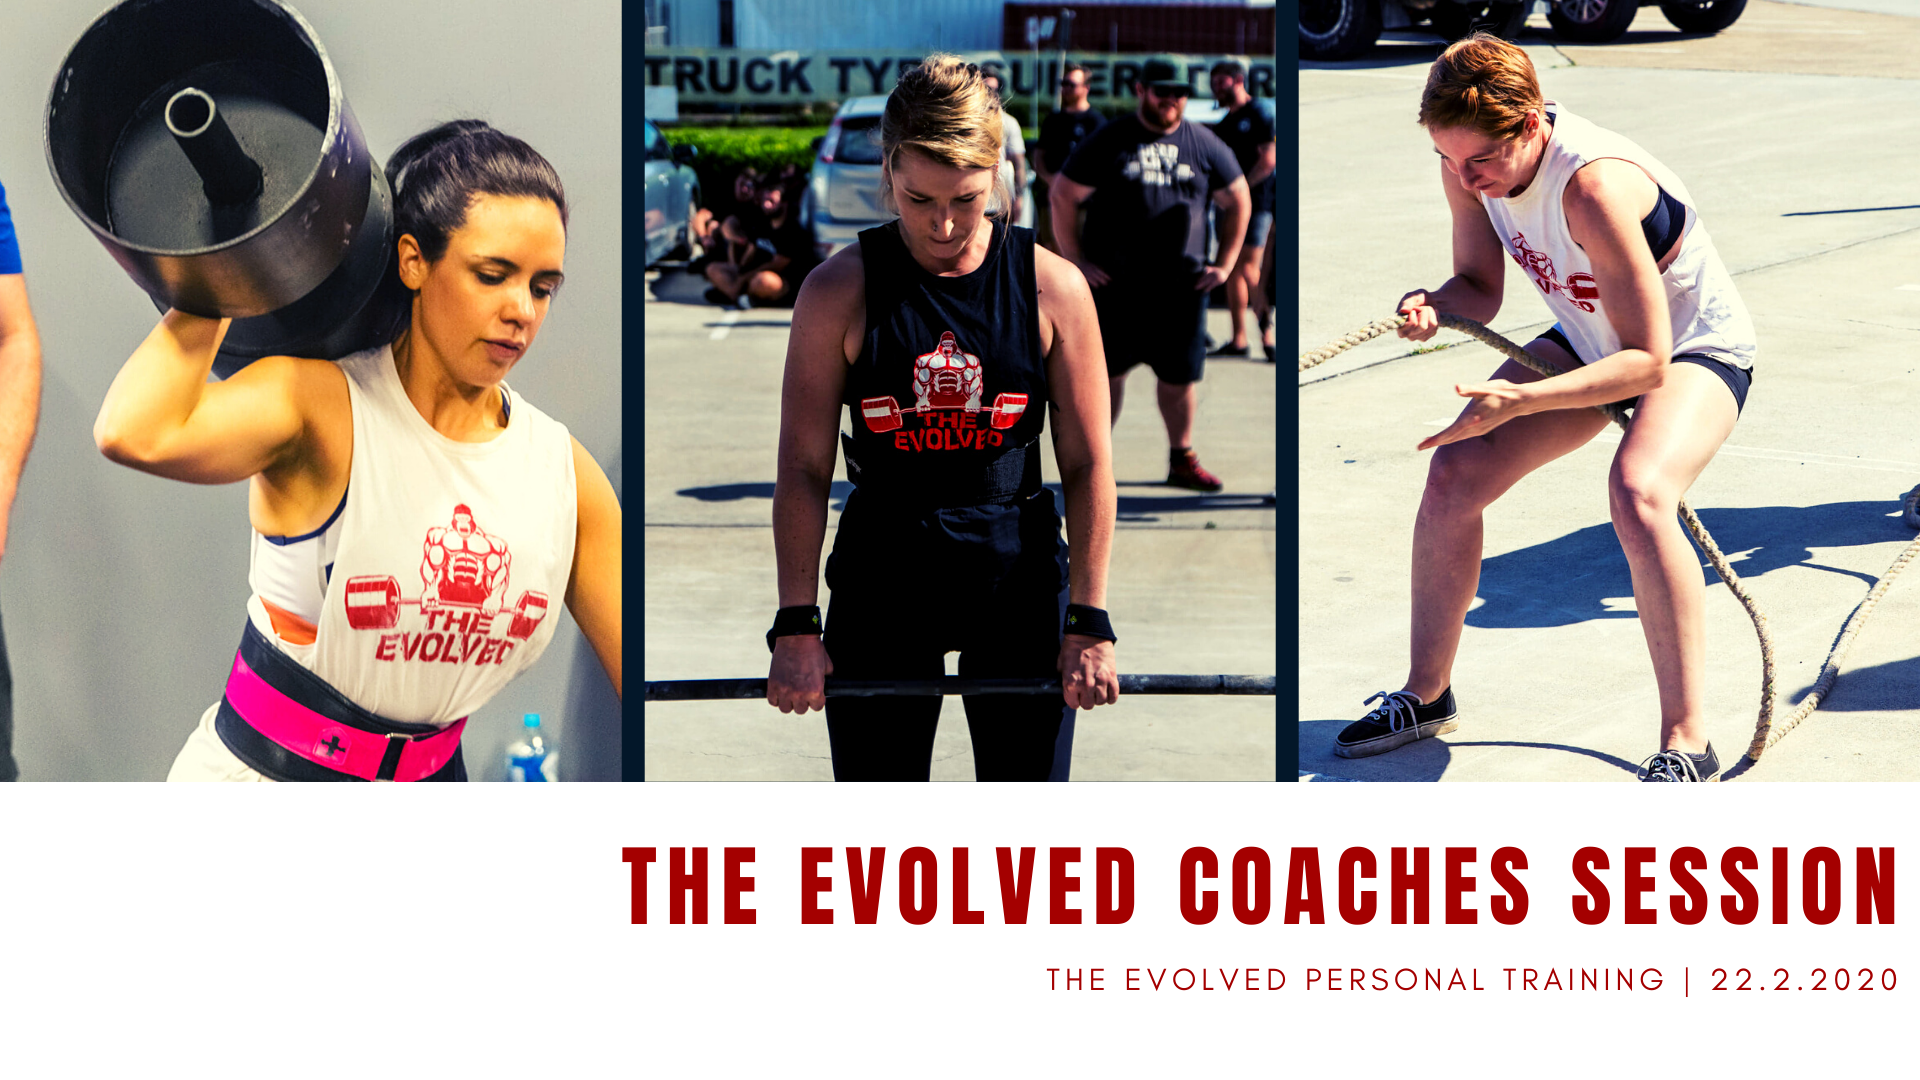 The Evolved Coaches Session